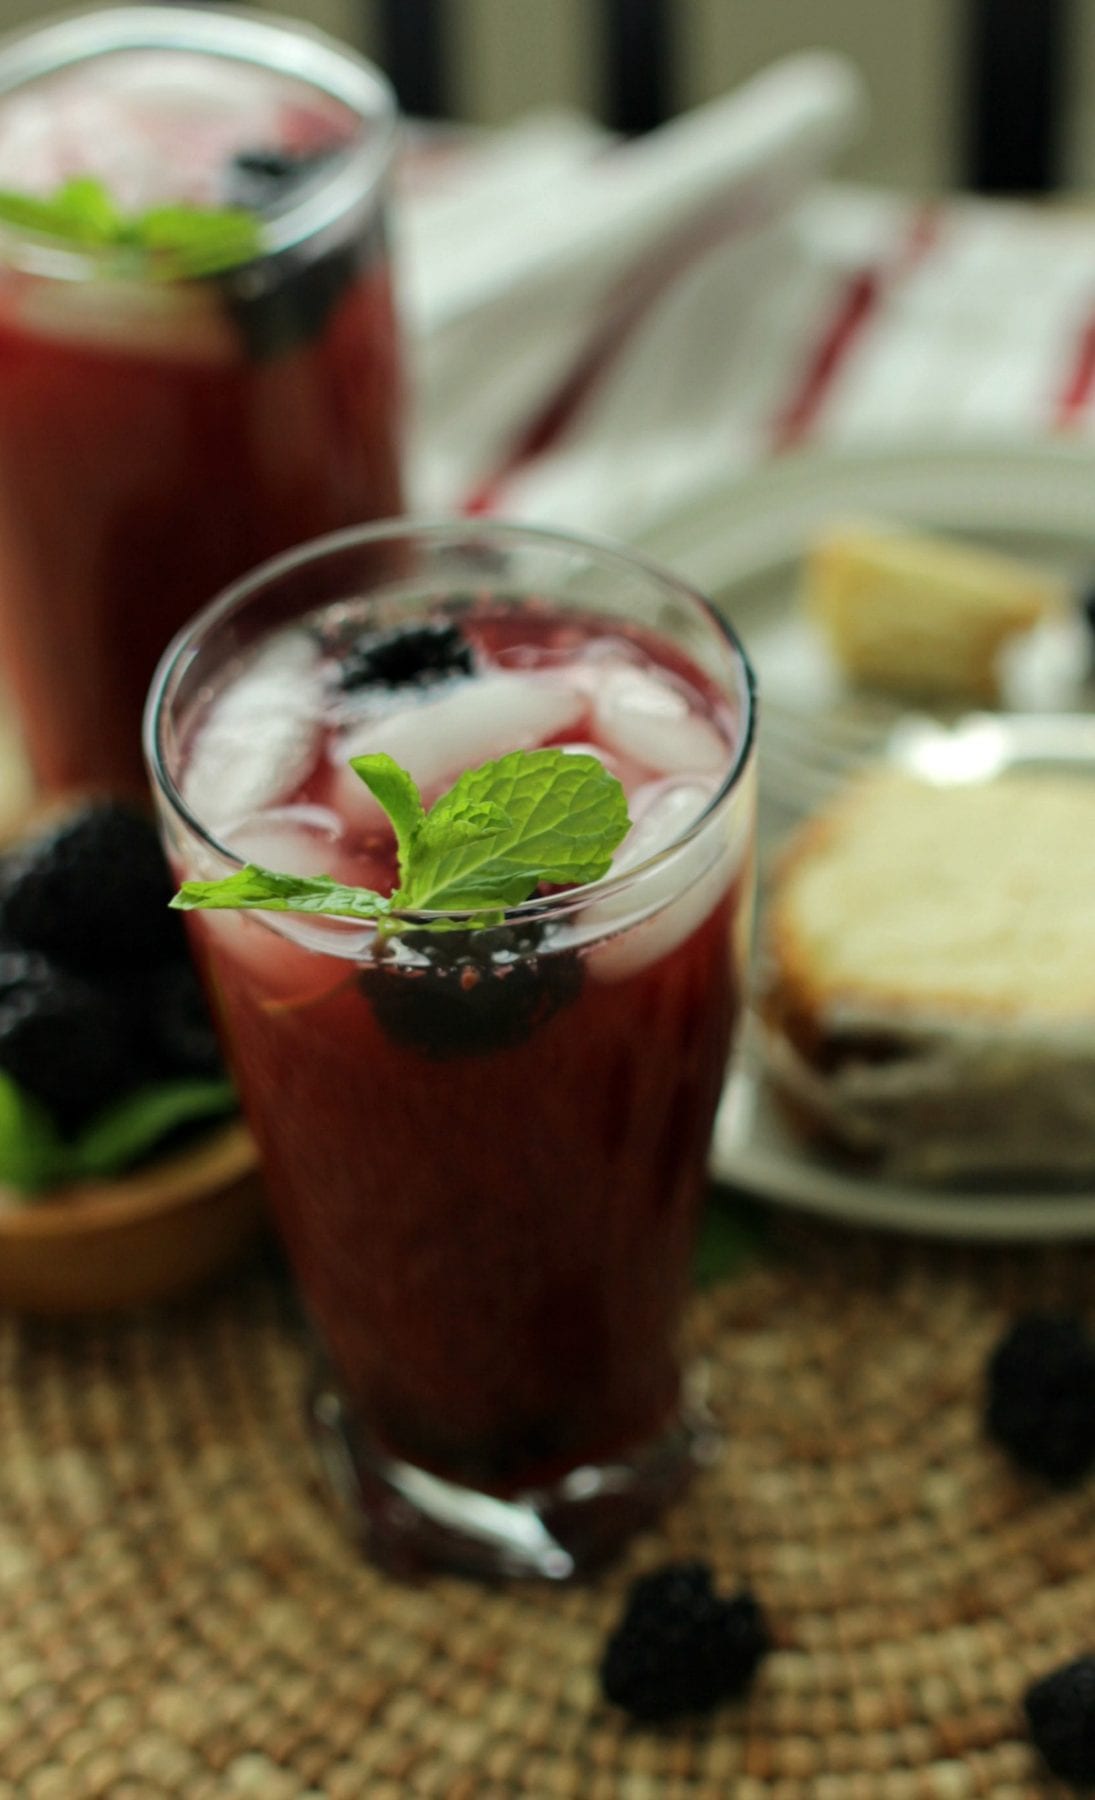 It’s almost iced tea season, which is a big deal in the South! To satisfy your sweet tooth and iced tea craving, whip up a pitcher of this Blackberry Mint Iced Tea perfectly sweetened with Zing Zero Calorie Stevia Sweetener.